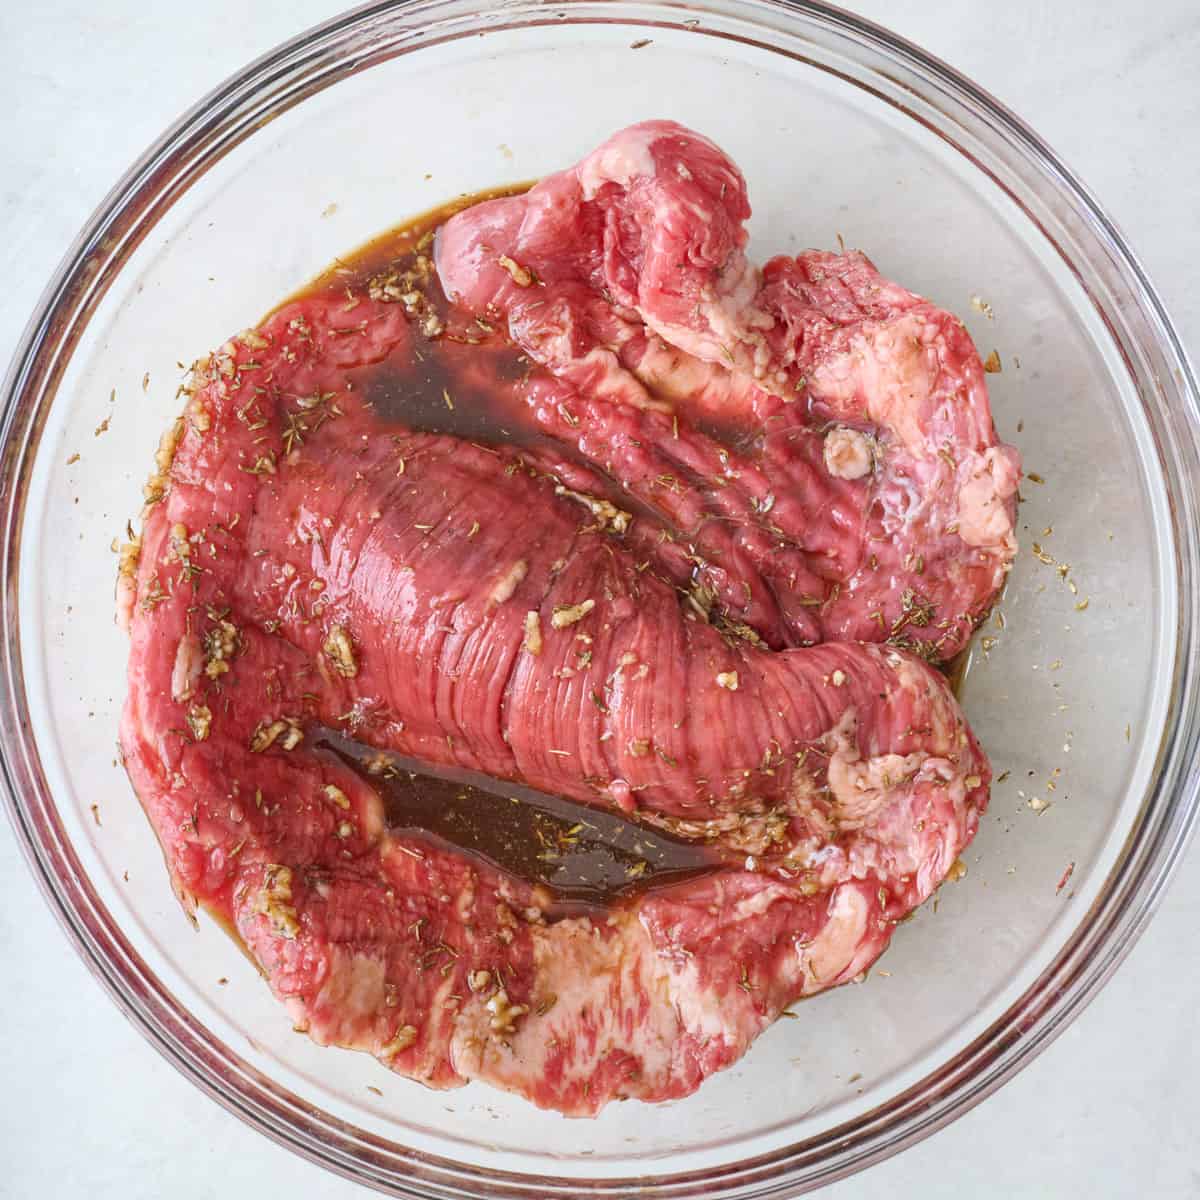 Flank steak in a bowl of marinade.